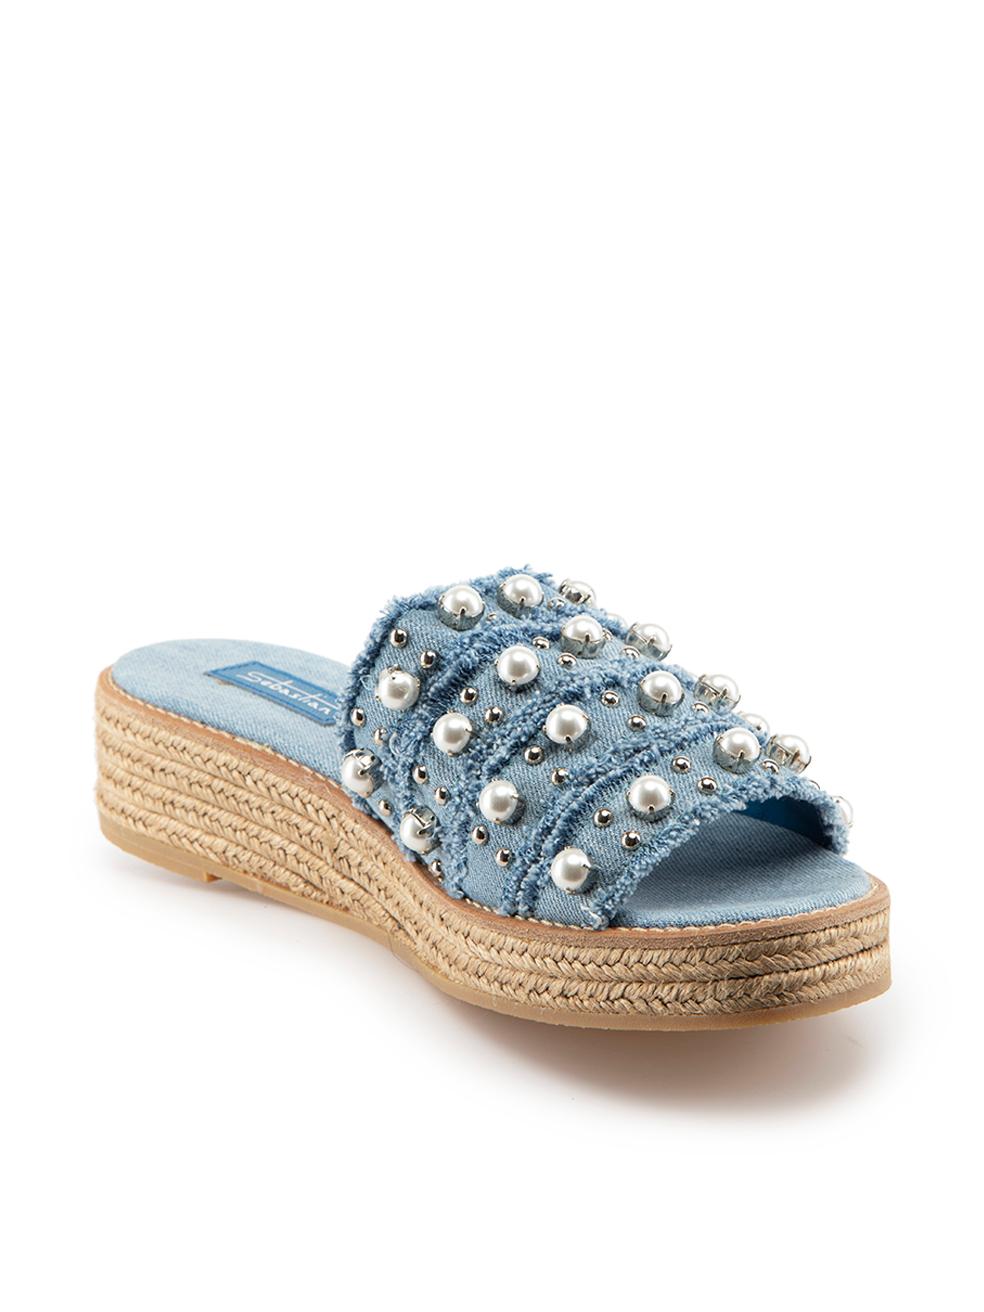 CONDITION is Good. Minor wear to shoes is evident. Light wear to both shoes with loose pearls and one missing embellishment on the right shoe on this used Sebastian designer resale item.
 
Details
 Blue
Denim
Slides
Platform
Open toe
Pearl and stud